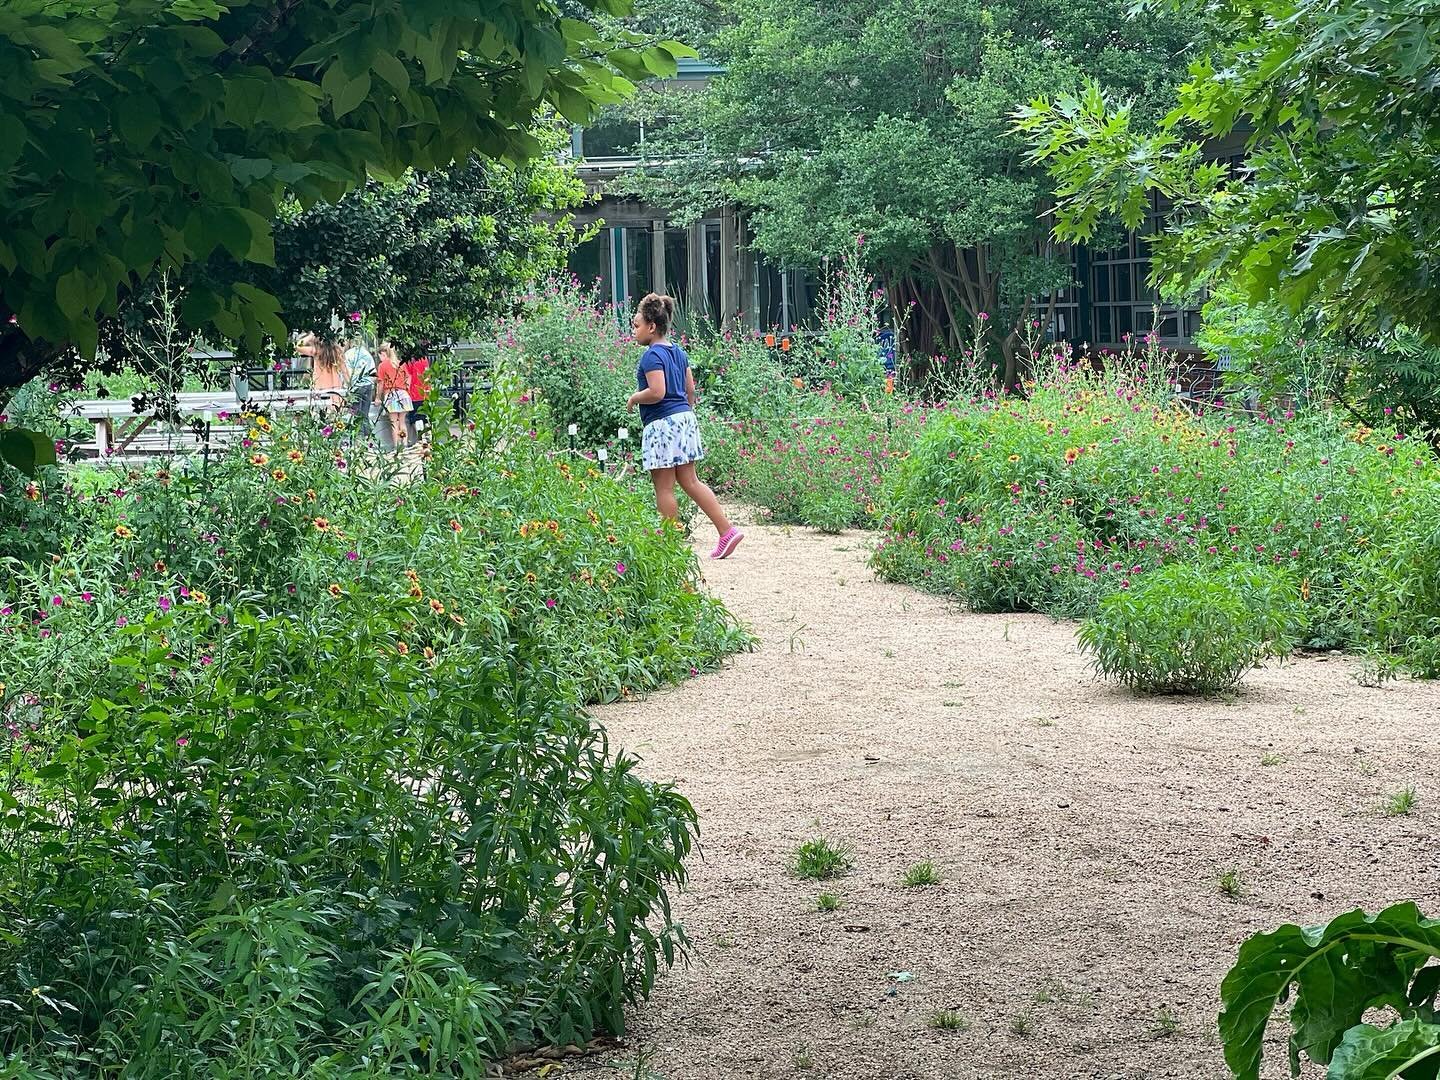 We lovingly installed this meadow at Gullet Elementary 2 years ago at cost. And over the past year we have been transforming the front of Davis Elementary with trails, seeded meadows, rain gardens, orchards and woodlands.

Interested in transforming 